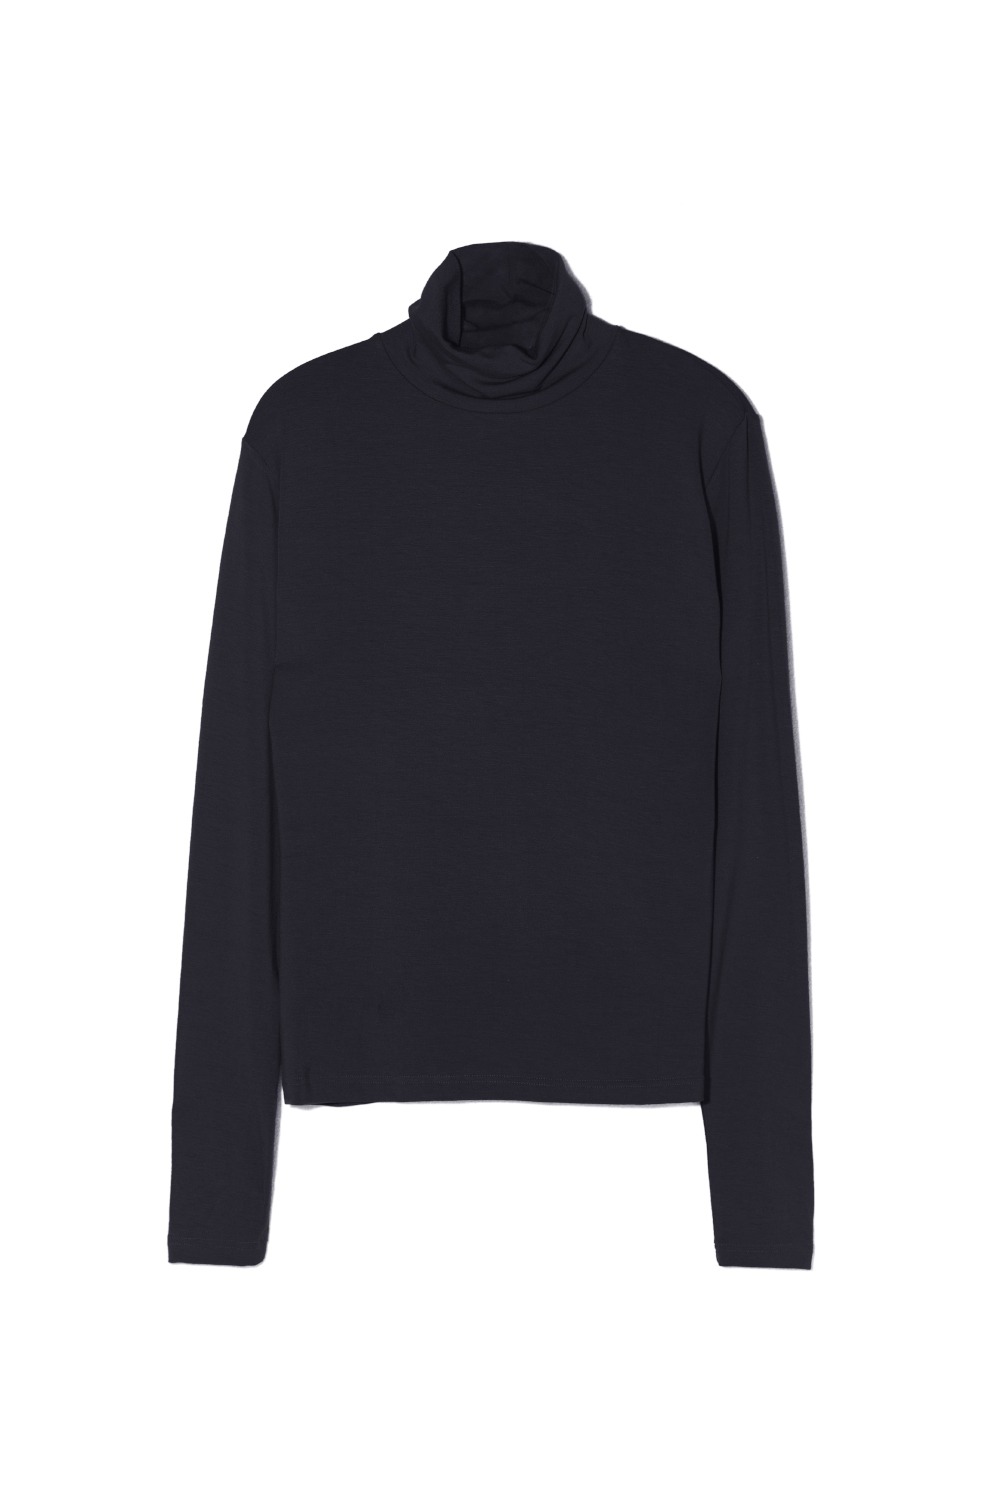 EVERYDAY TURTLE NECK_Charcoal